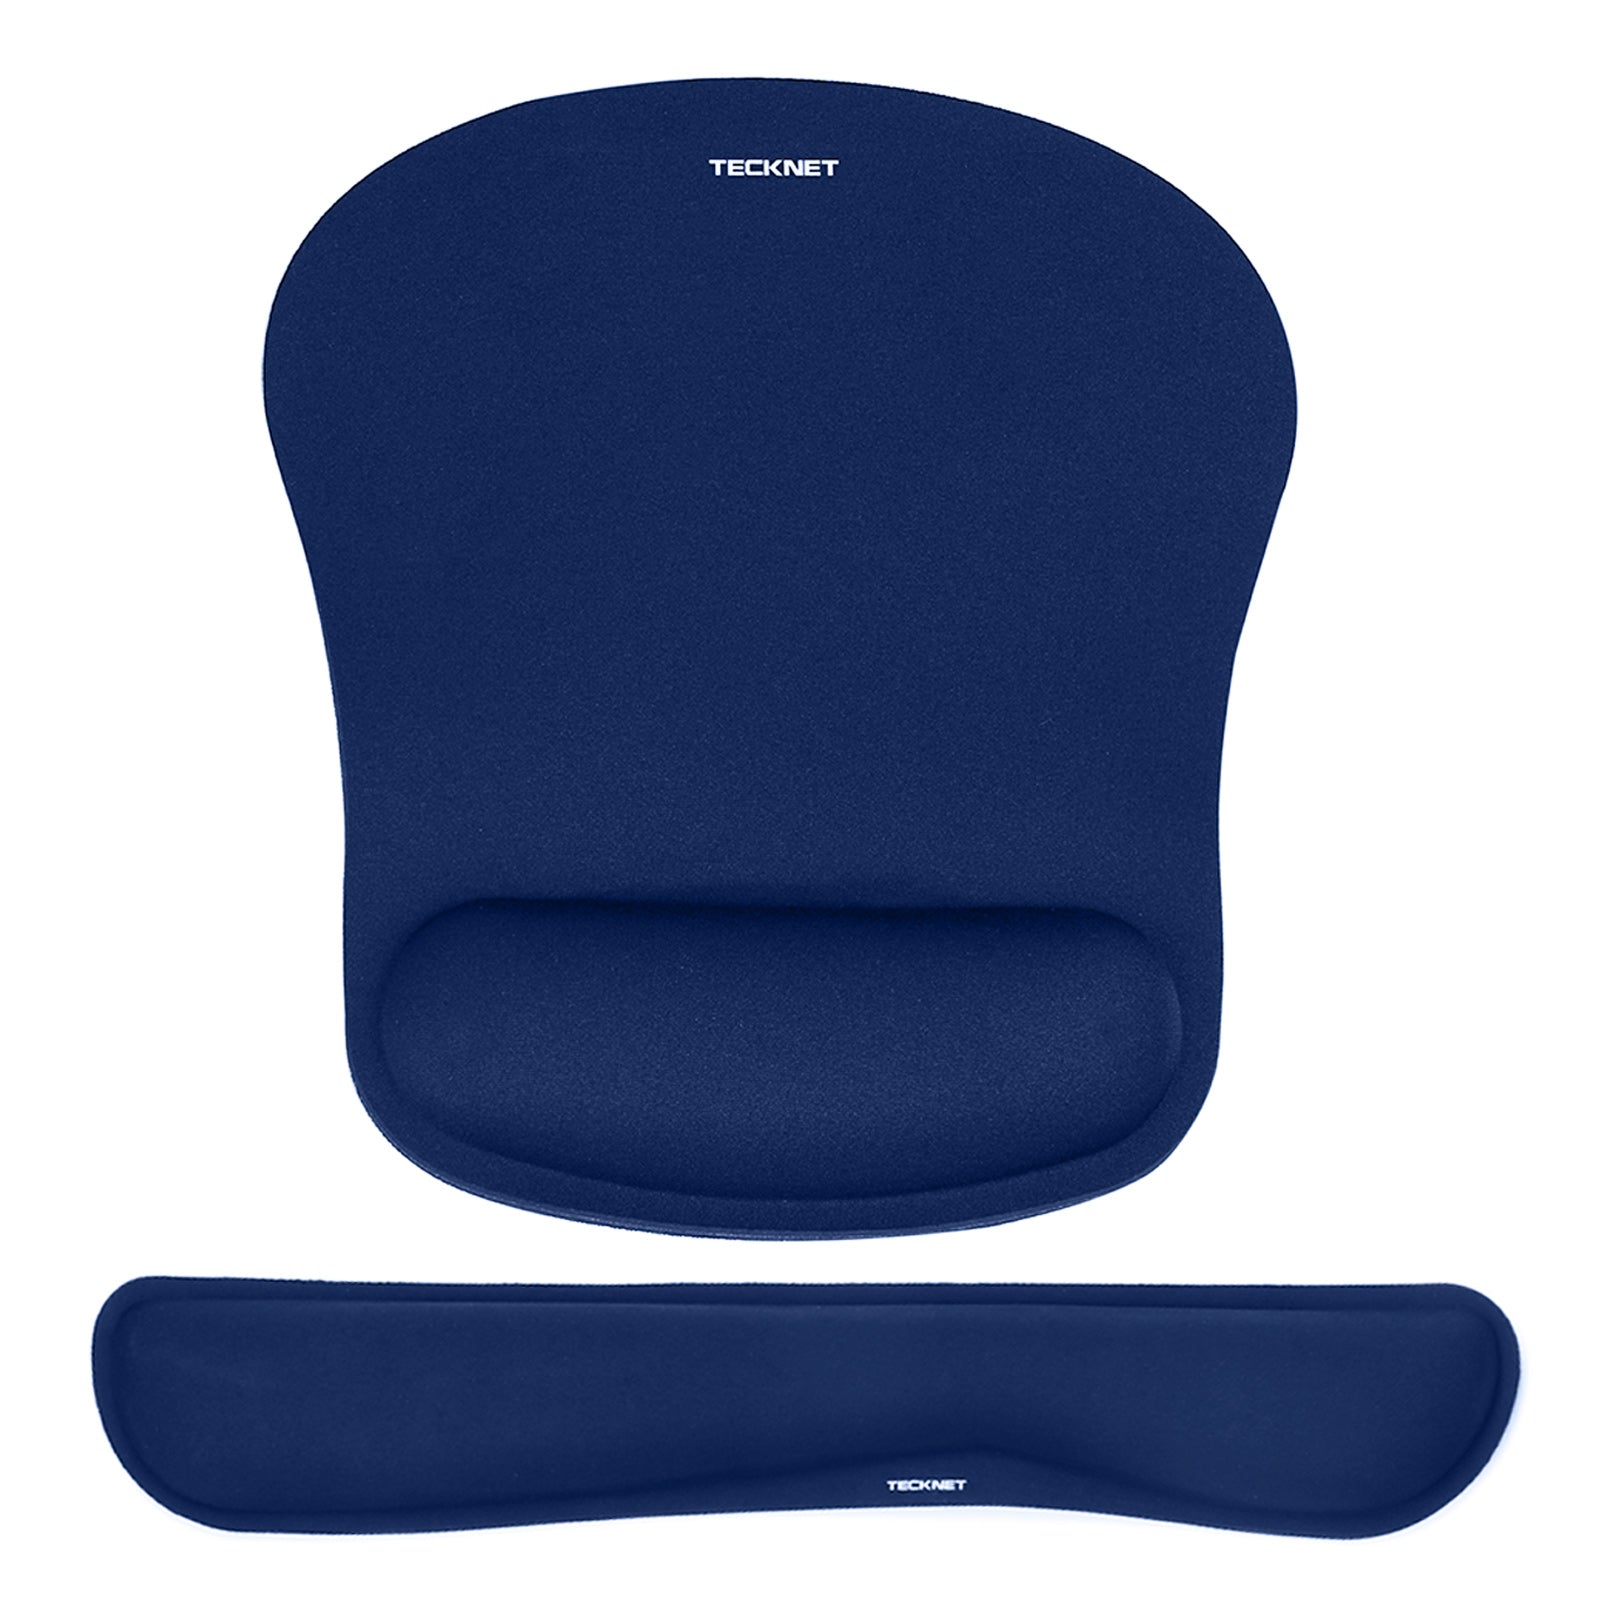 TECKNET Comfortable Mouse Pad With Wrist Support